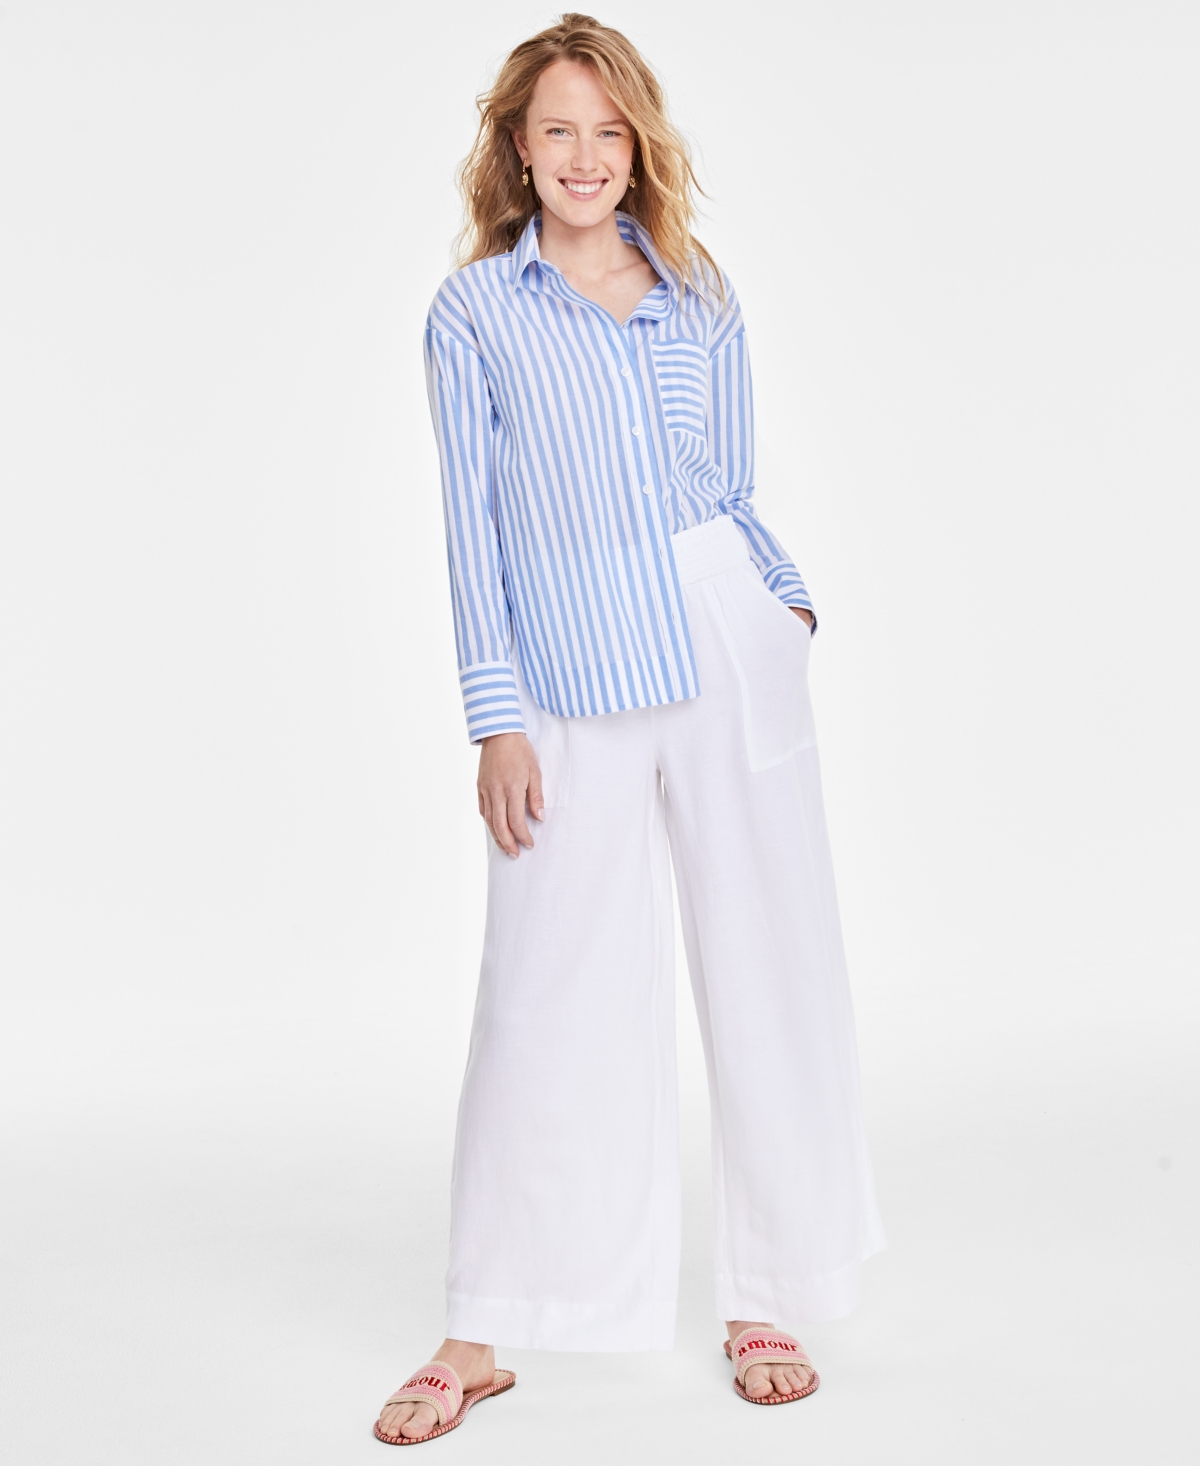 Women's Stripe Relaxed-Fit Shirt, Created for Macy's - Regatta Combo